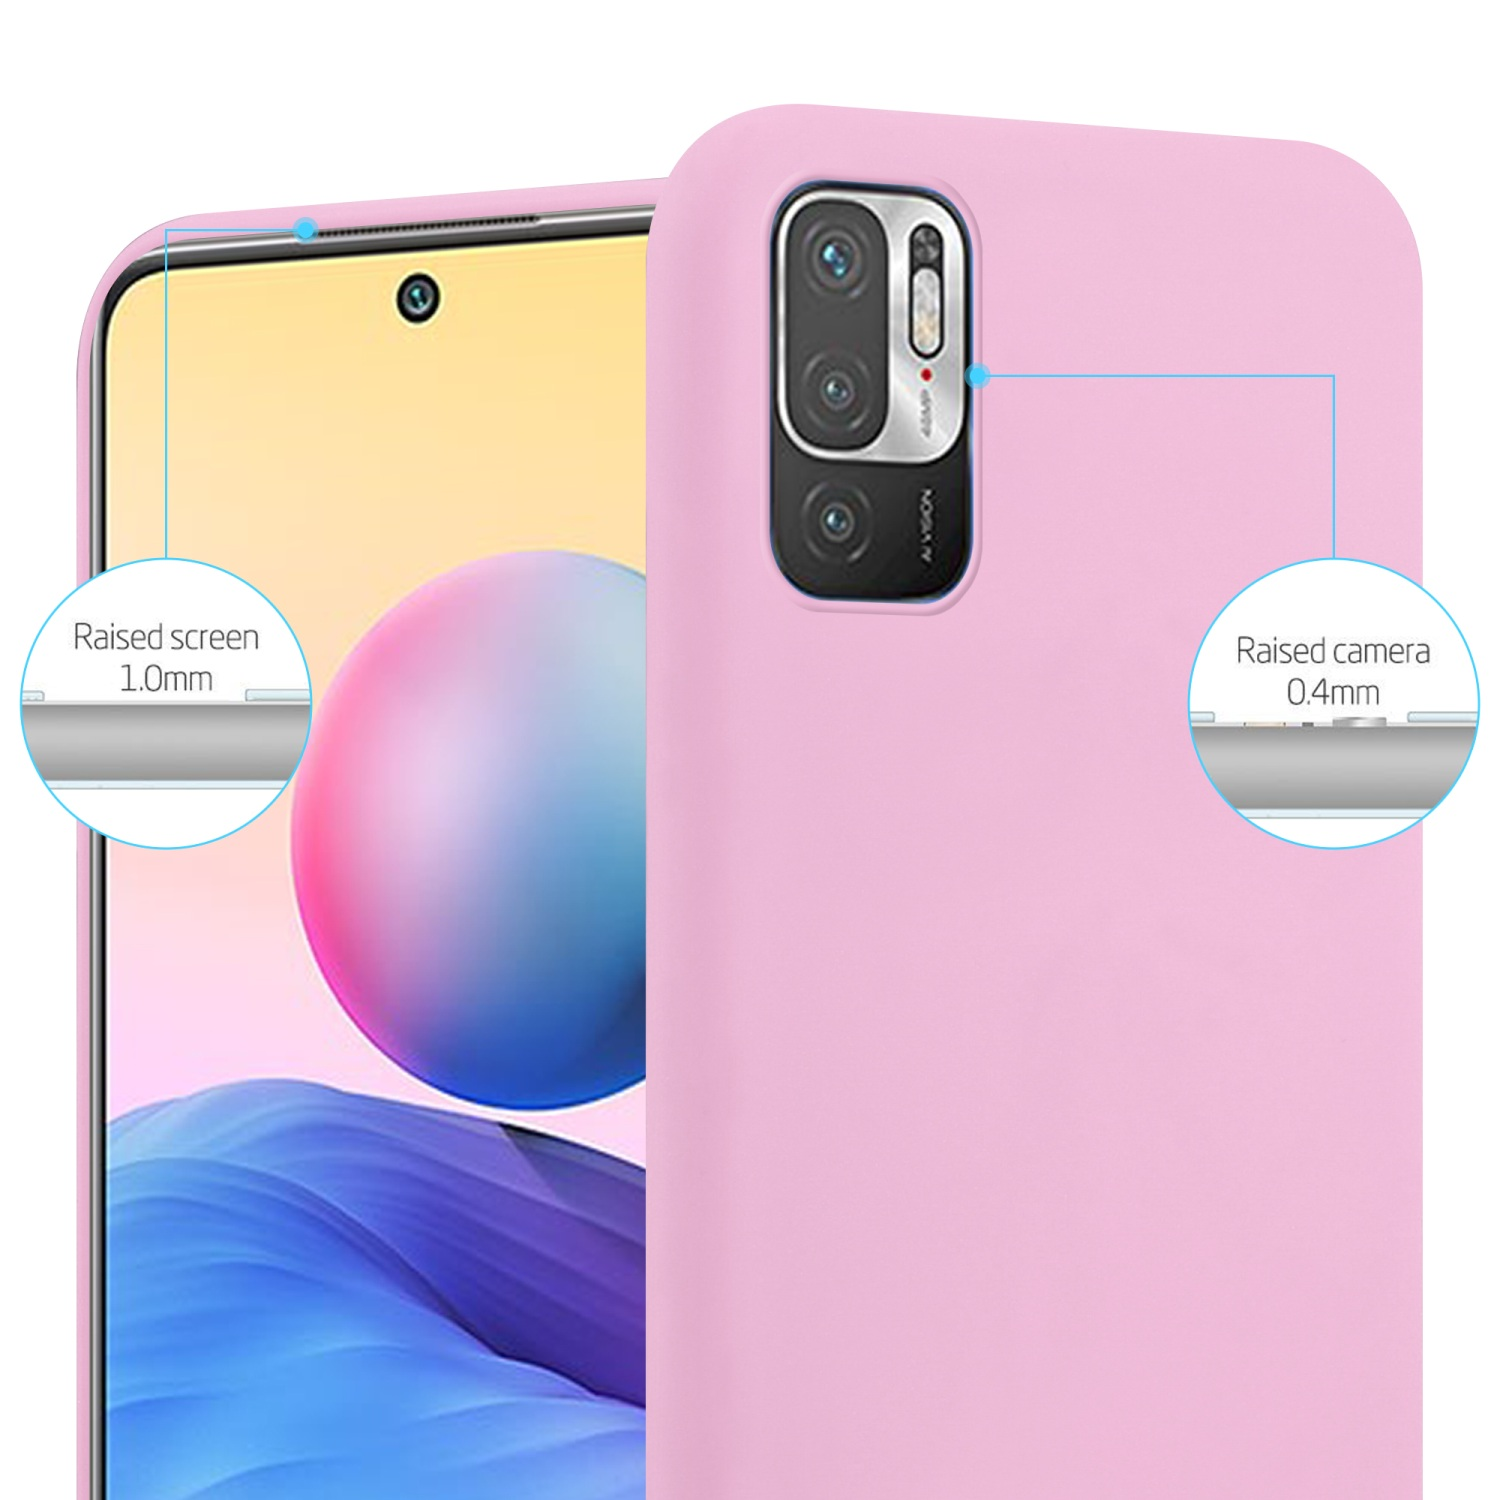 Style, / PRO POCO Xiaomi, ROSA CADORABO CANDY NOTE M3 Candy 10 RedMi 5G im TPU Backcover, Hülle 5G,